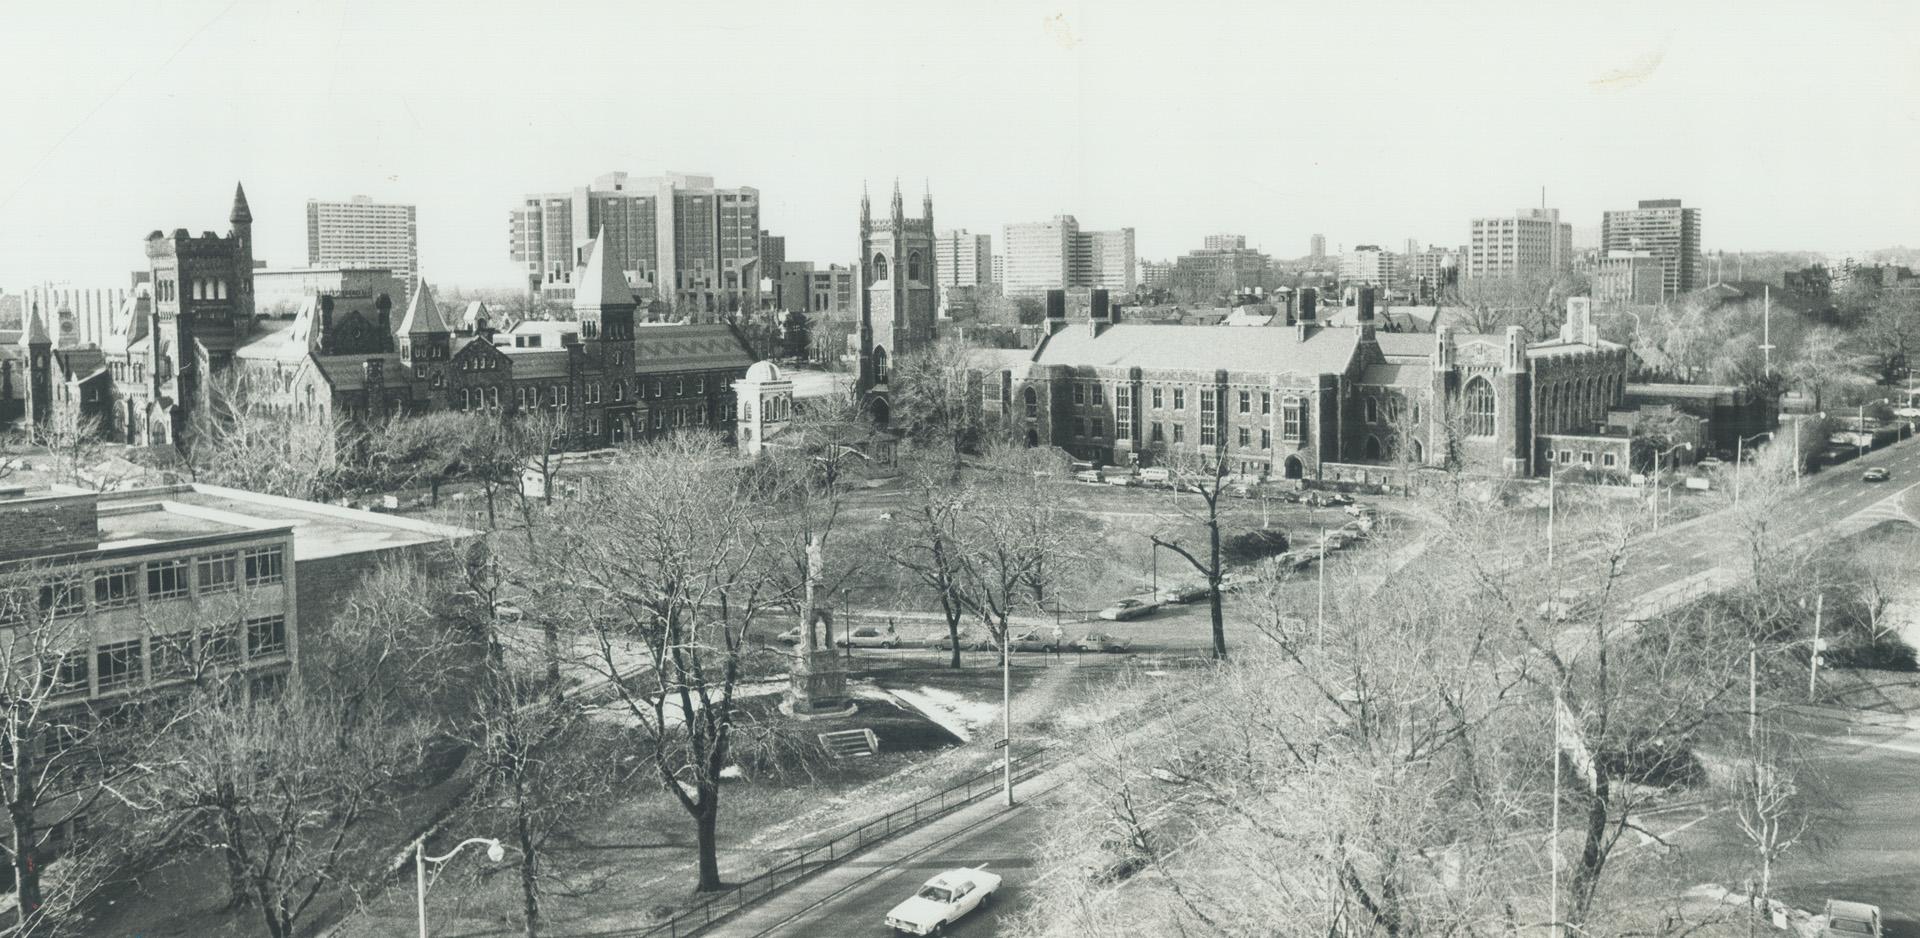 University College, left, and Har House on University of Toronto downtown campus, against backdrop of city high-rises